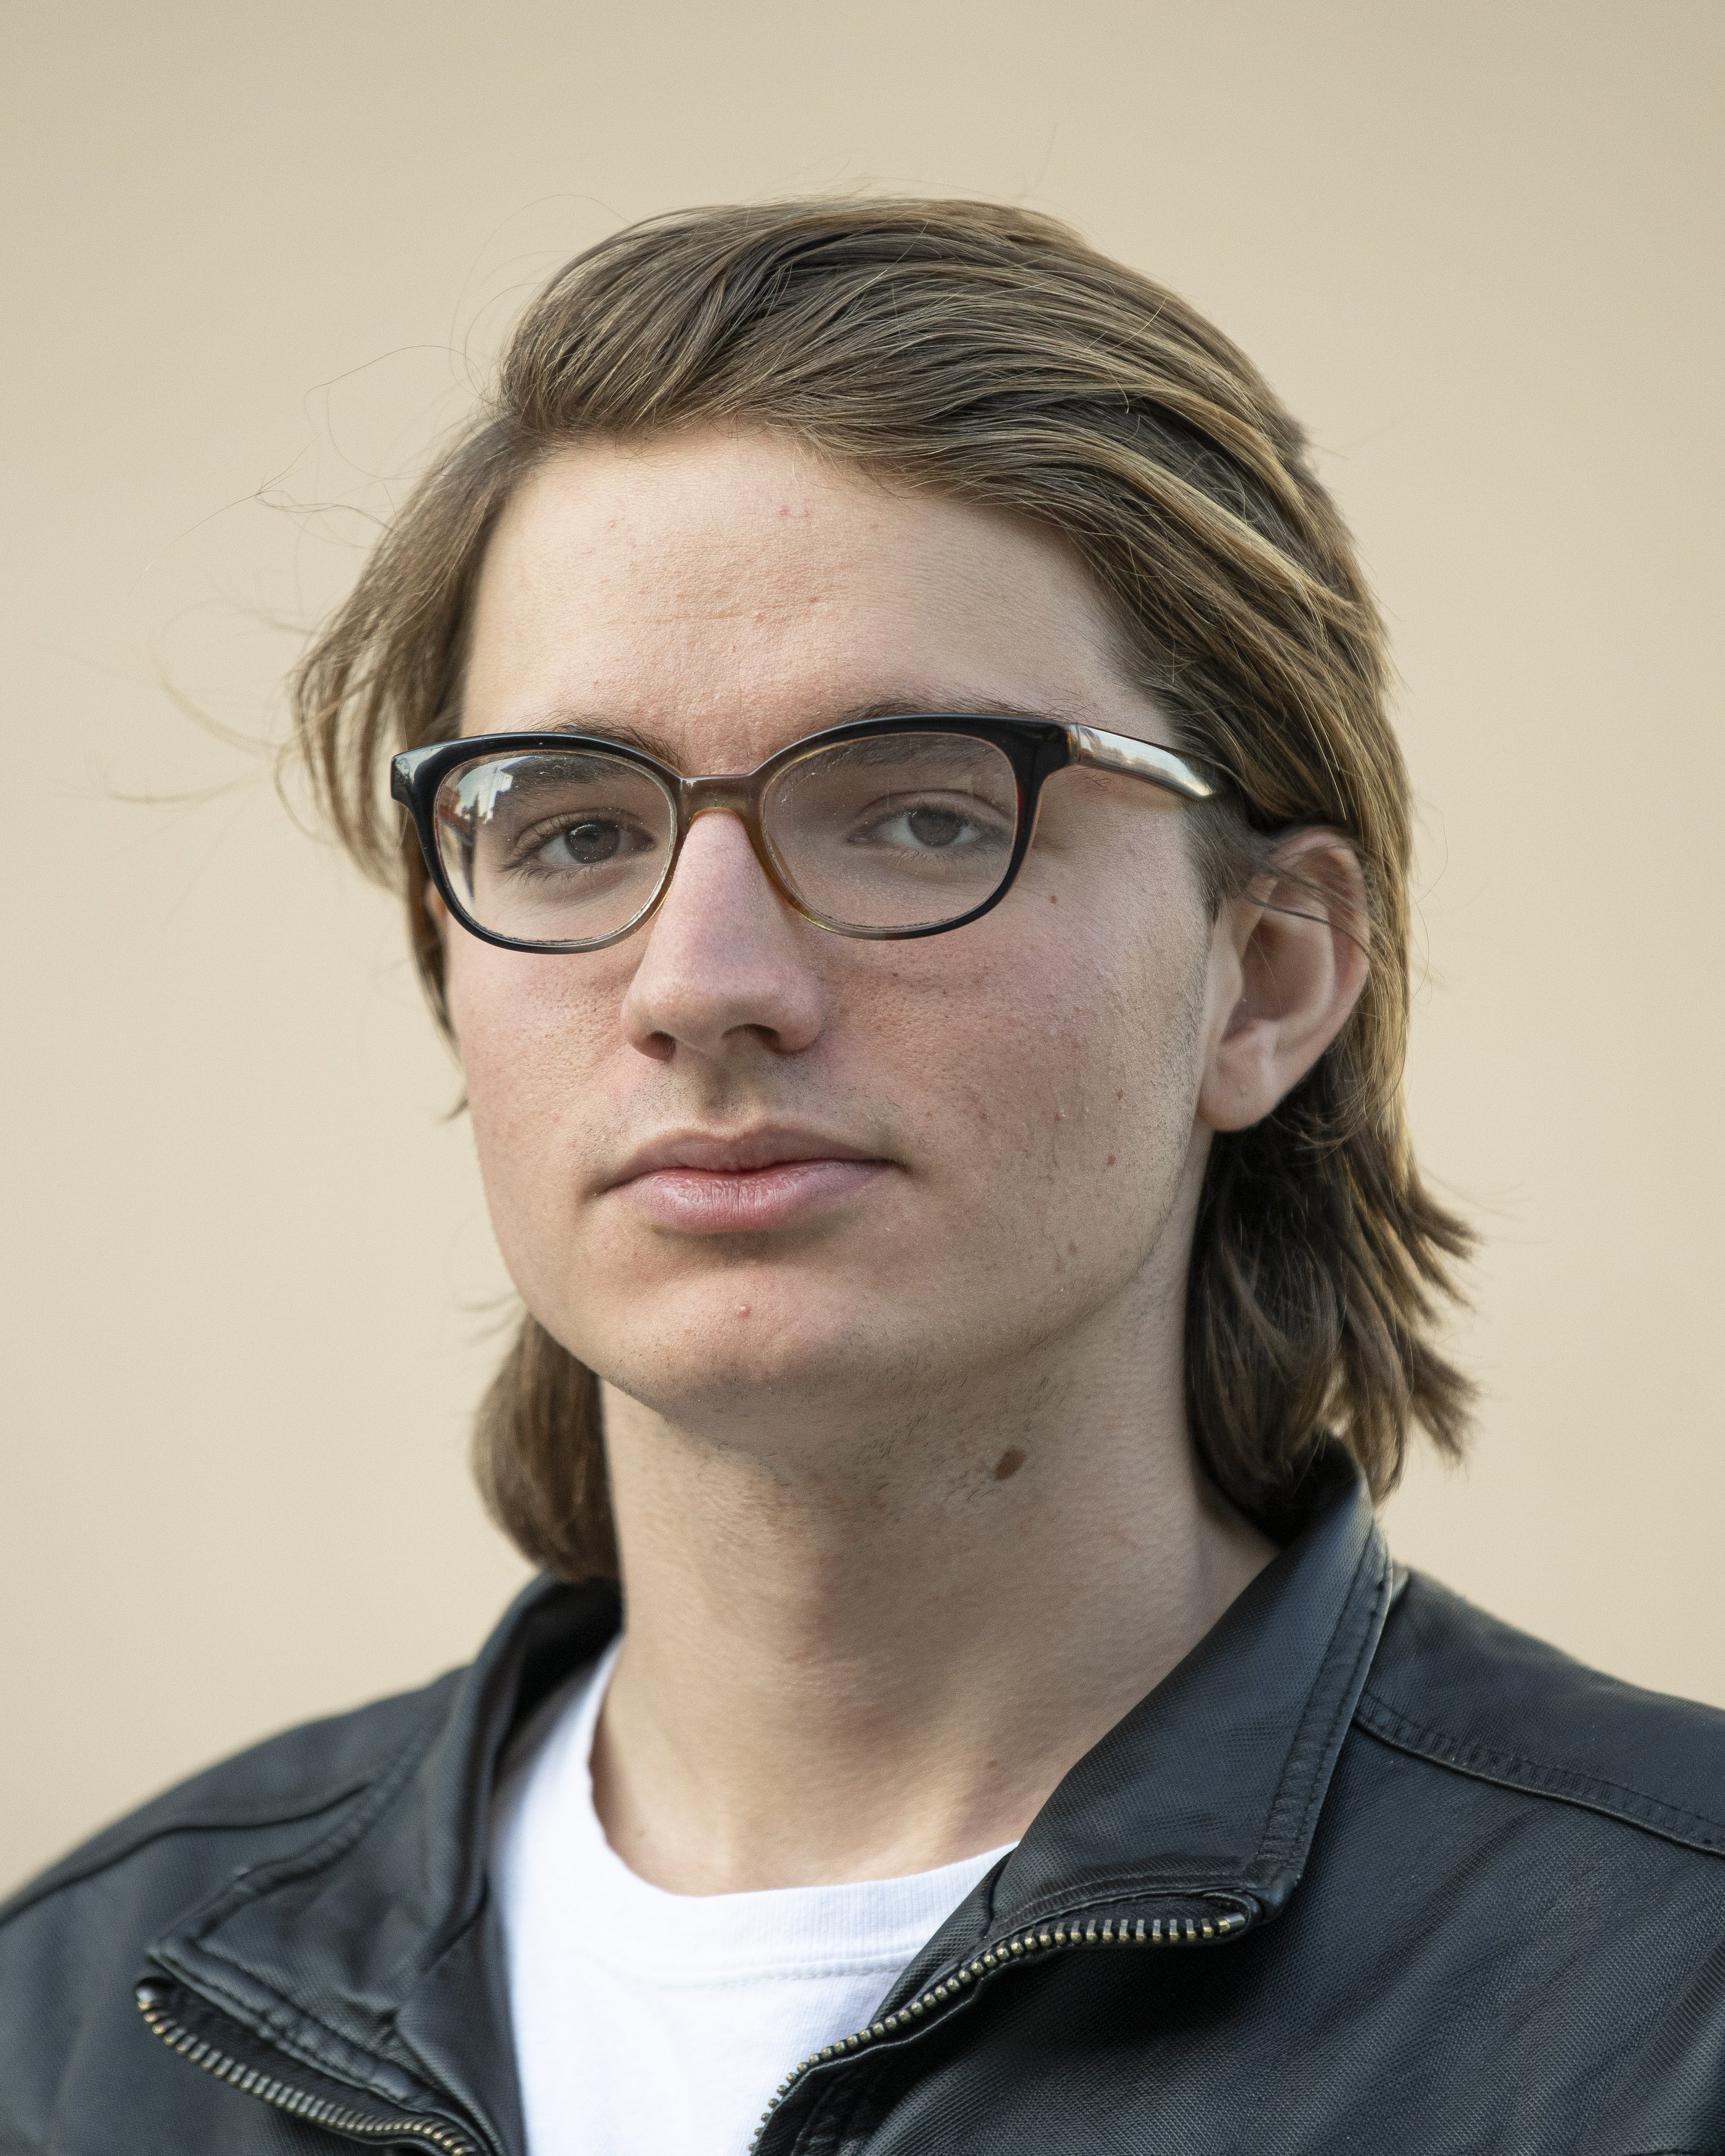  Alex Gruenenfelder curerntly the youngest candidate to run for LA Mayor at the age of 21, posses for a portrait as he tries to campaign outside the Mayoral debate in which he was not invited to like other candidates that dont seem to fit the script 